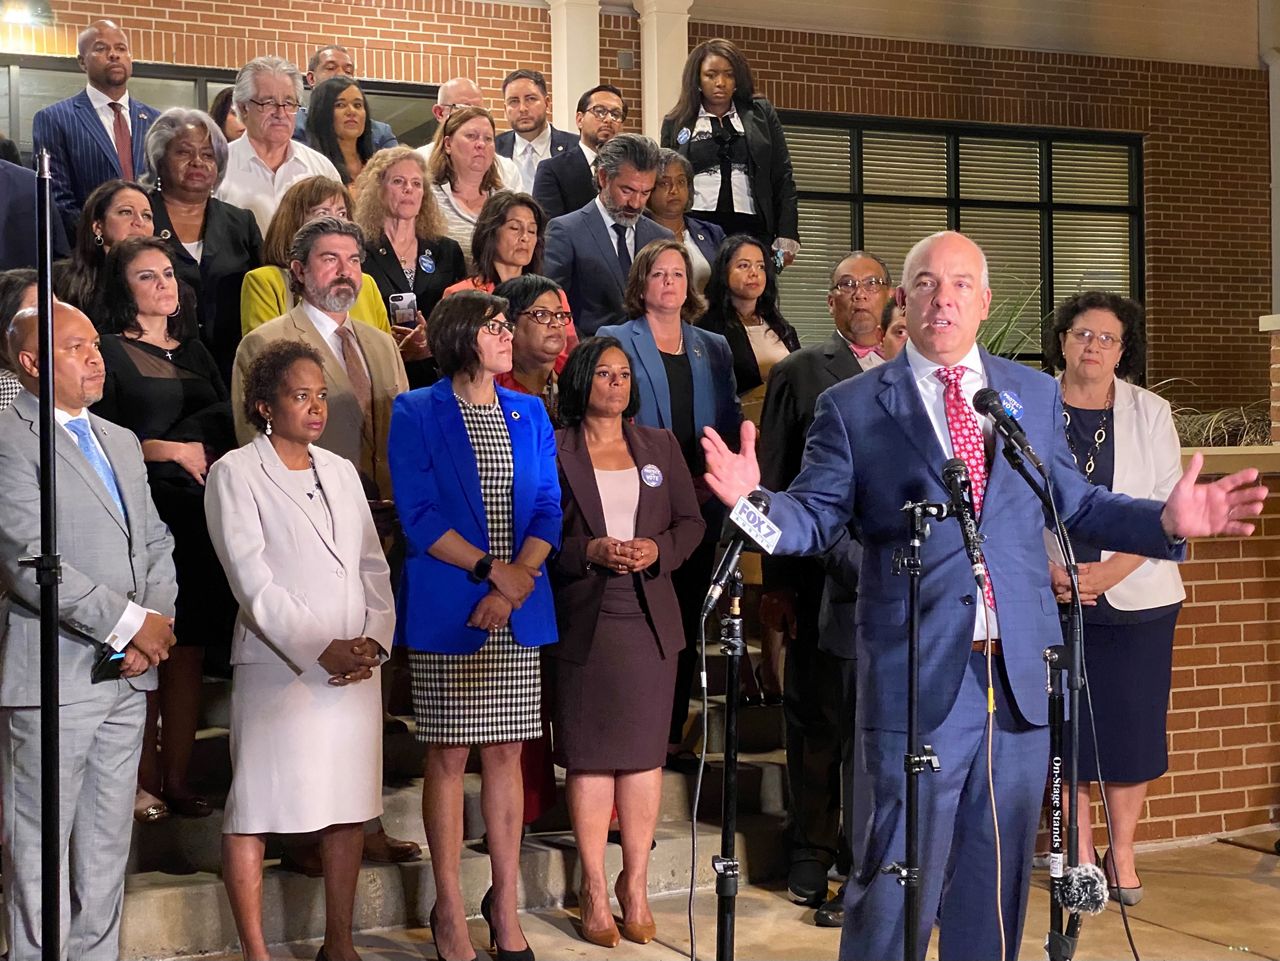 Texas state Rep. Chris Turner, D-Dallas, speaks during a press conference at Mt. Zion Baptist Church in Austin, Texas. The conference occurred after Democrats exited the House chamber to block voting on a controversial election bill. (Spectrum News 1/Reena Diamante)